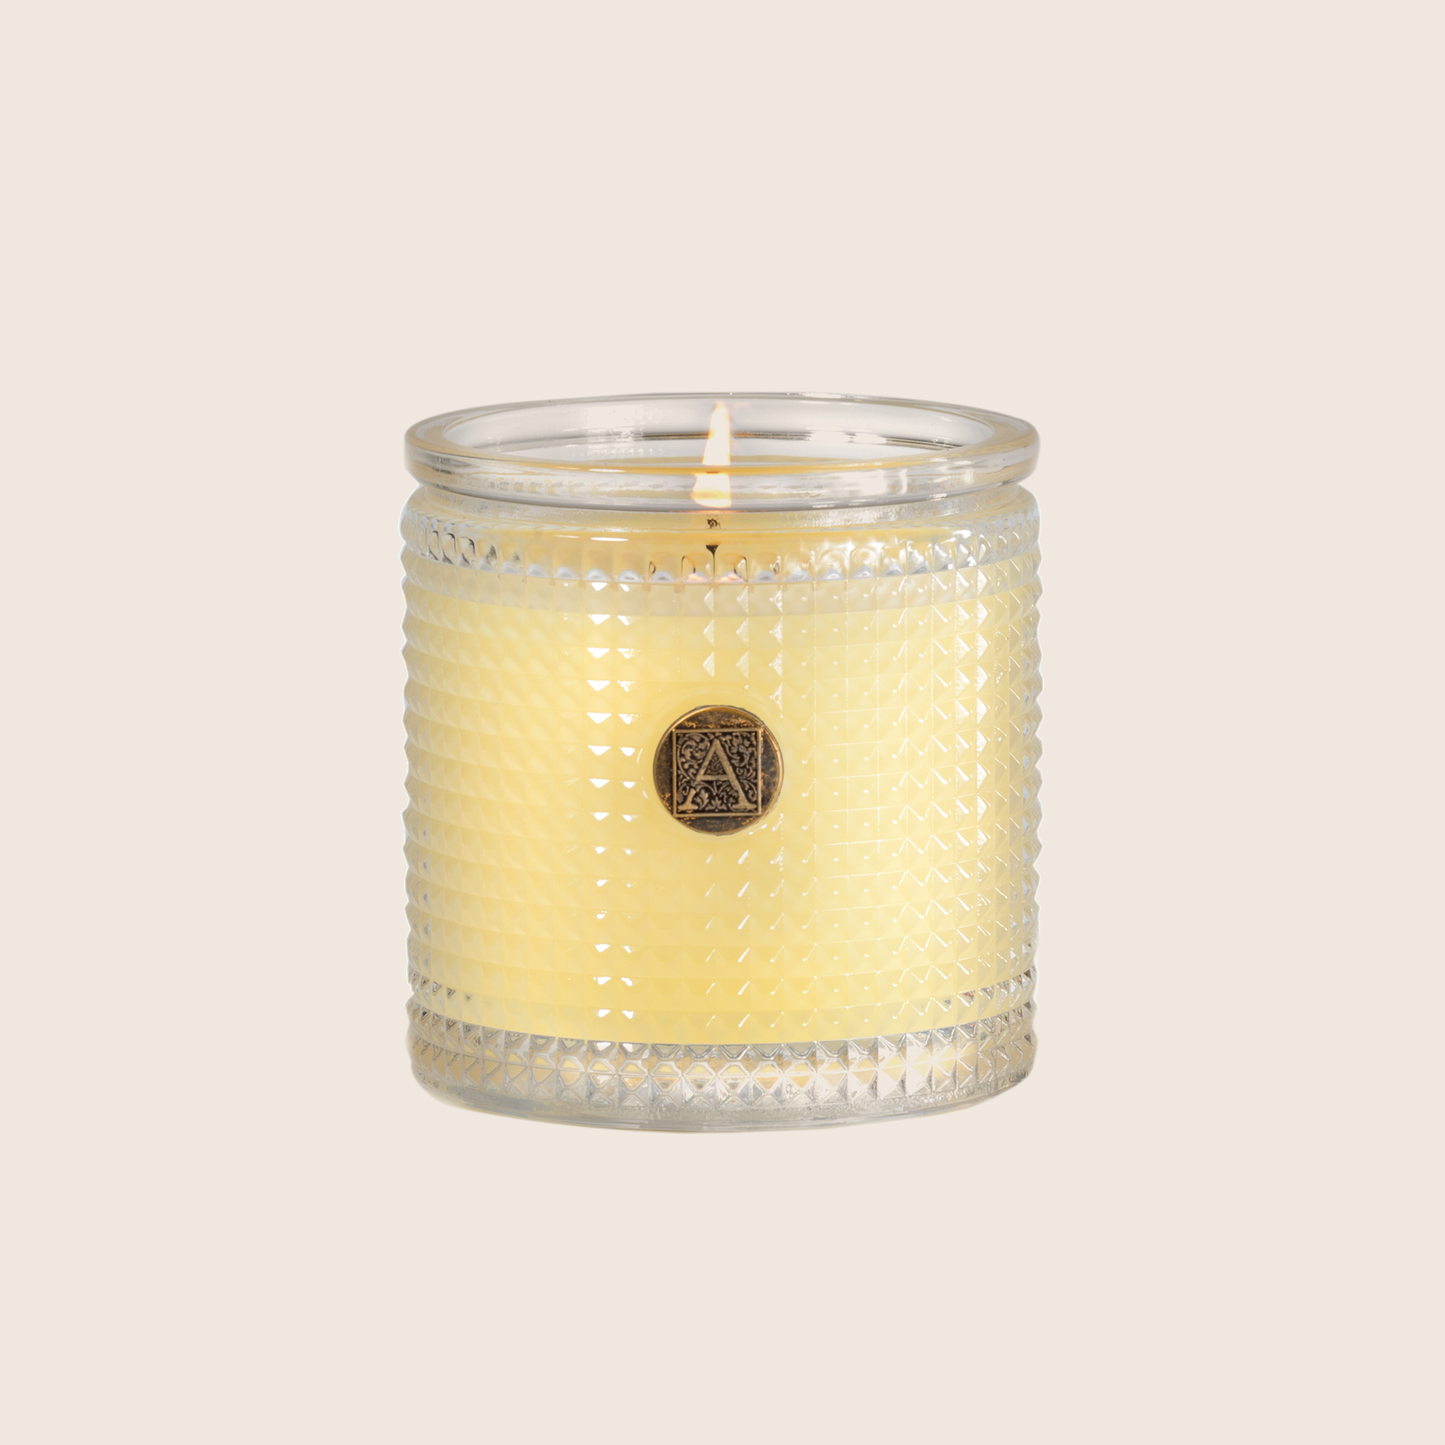 Aromatique Sorbet Textured Glass Candle